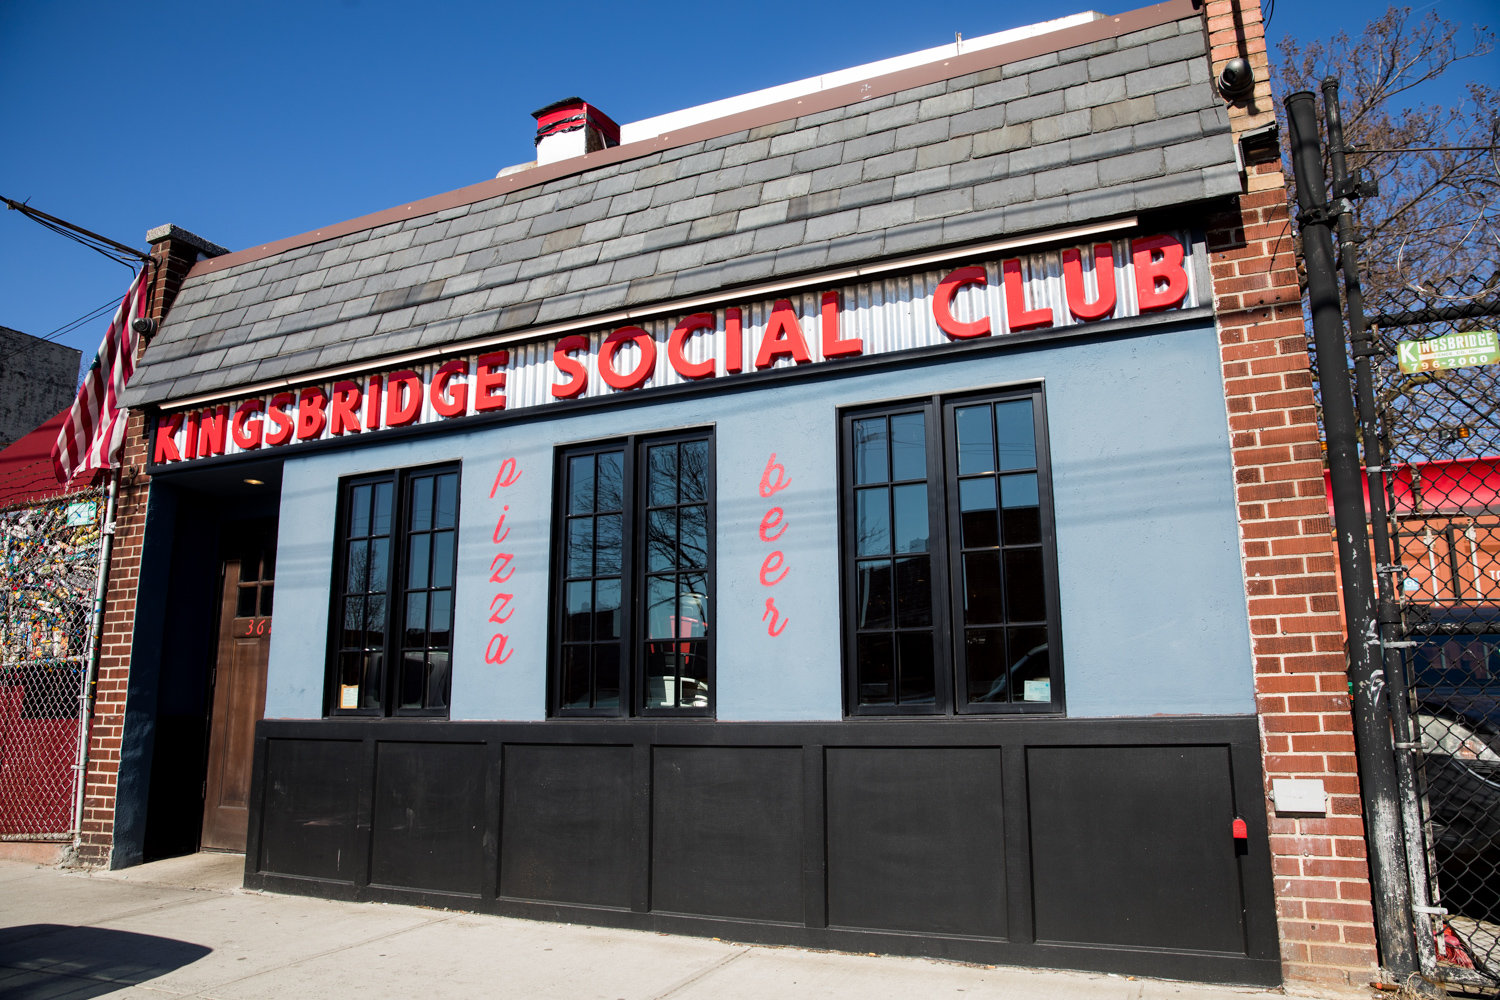 Regulars and first-time customers alike will no longer be able to enjoy the rustic interior of Kingsbridge Social Club after Mayor Bill de Blasio’s executive order that limited all restaurants and bars to take out and delivery orders only.